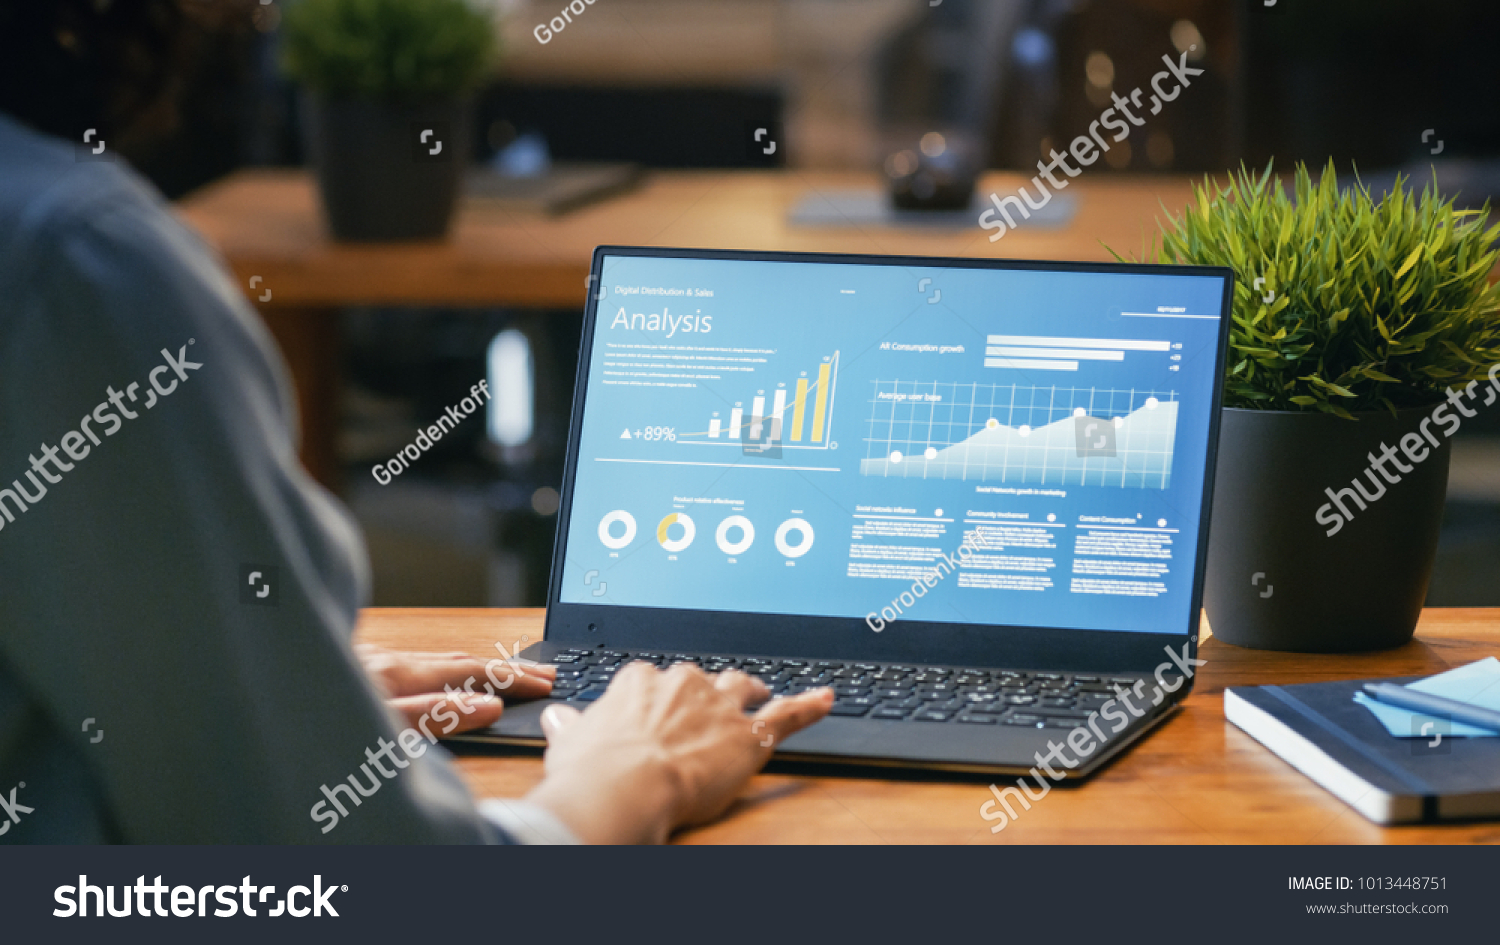 Female Analyst at Her Desk Works on a Laptop Showing Statistics, Graphs and Charts. She Works on the Wooden Table in Creative Office. Over the Shoulder Footage. #1013448751